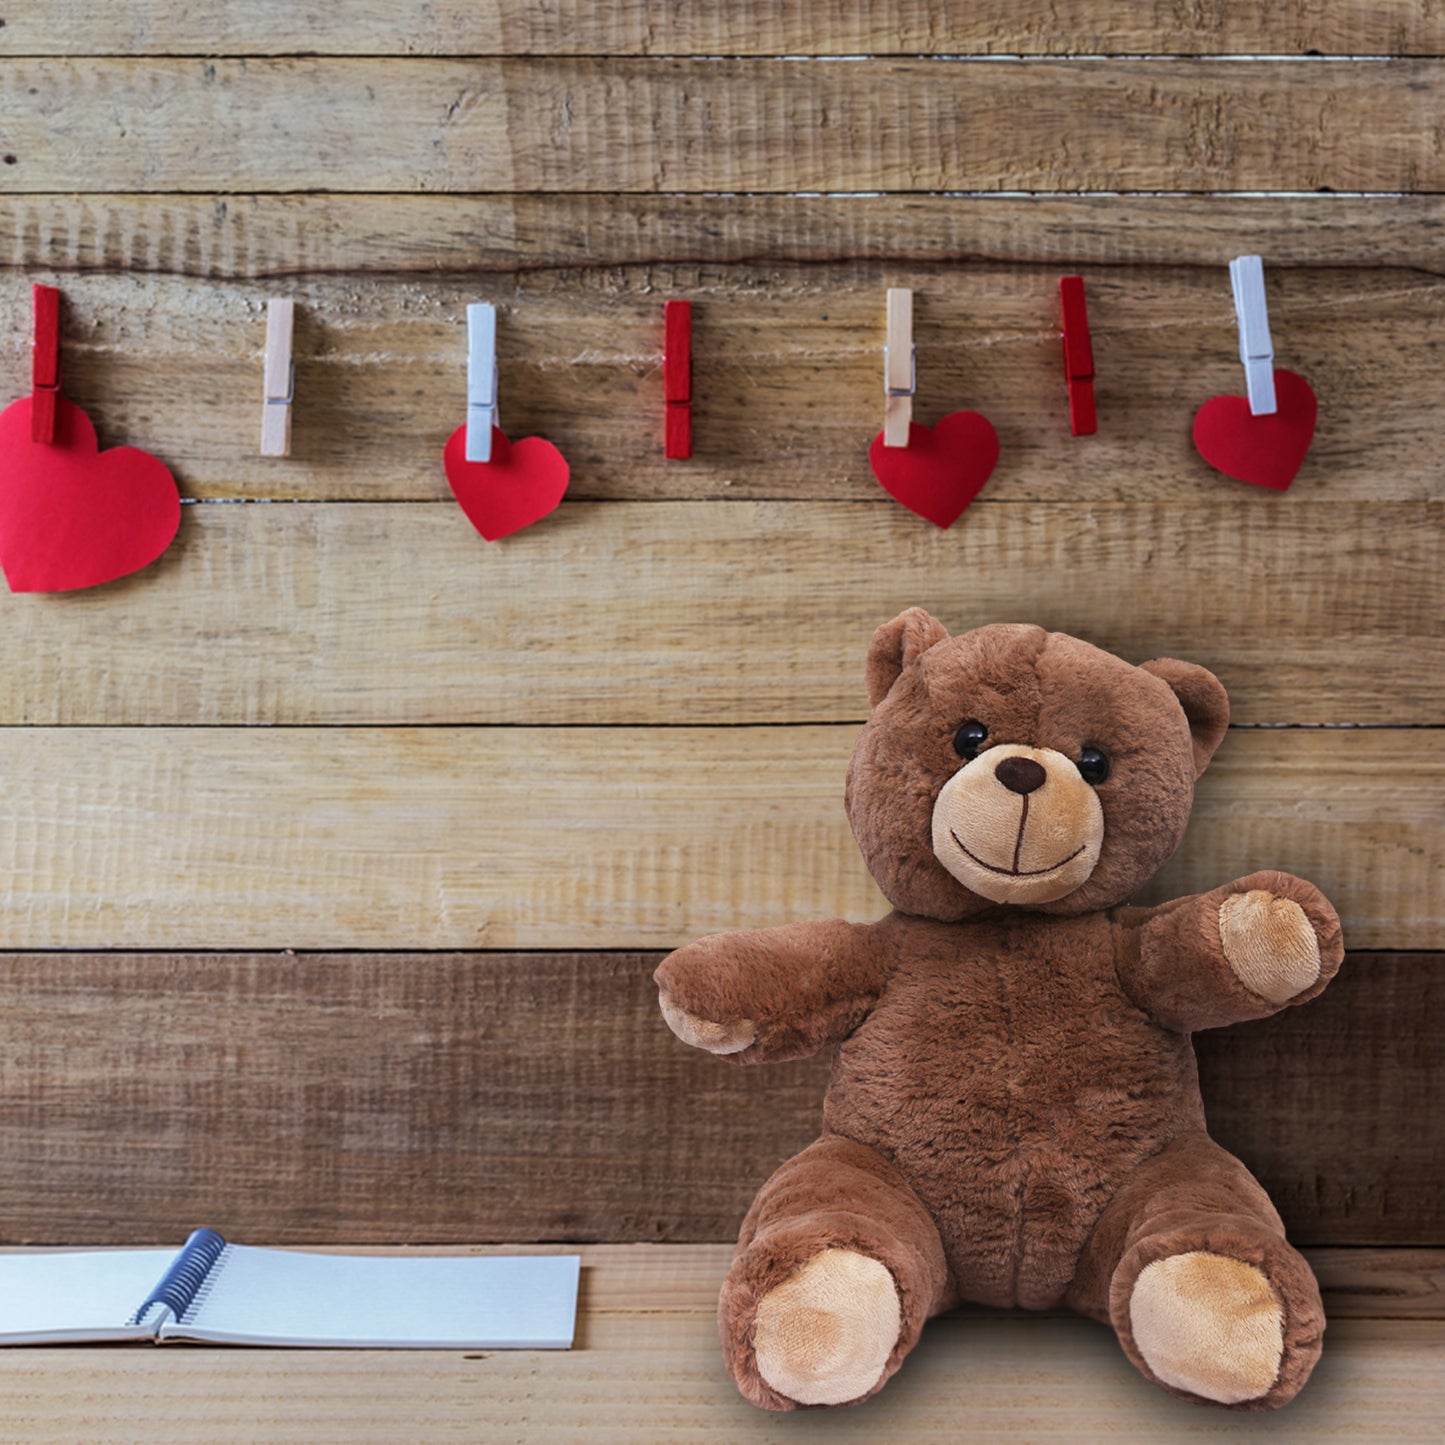 Toyroom-DIY Teddy Bear-Make Your Own Stuff Teddy ( Includes stuffing, birth certificate and a heart)